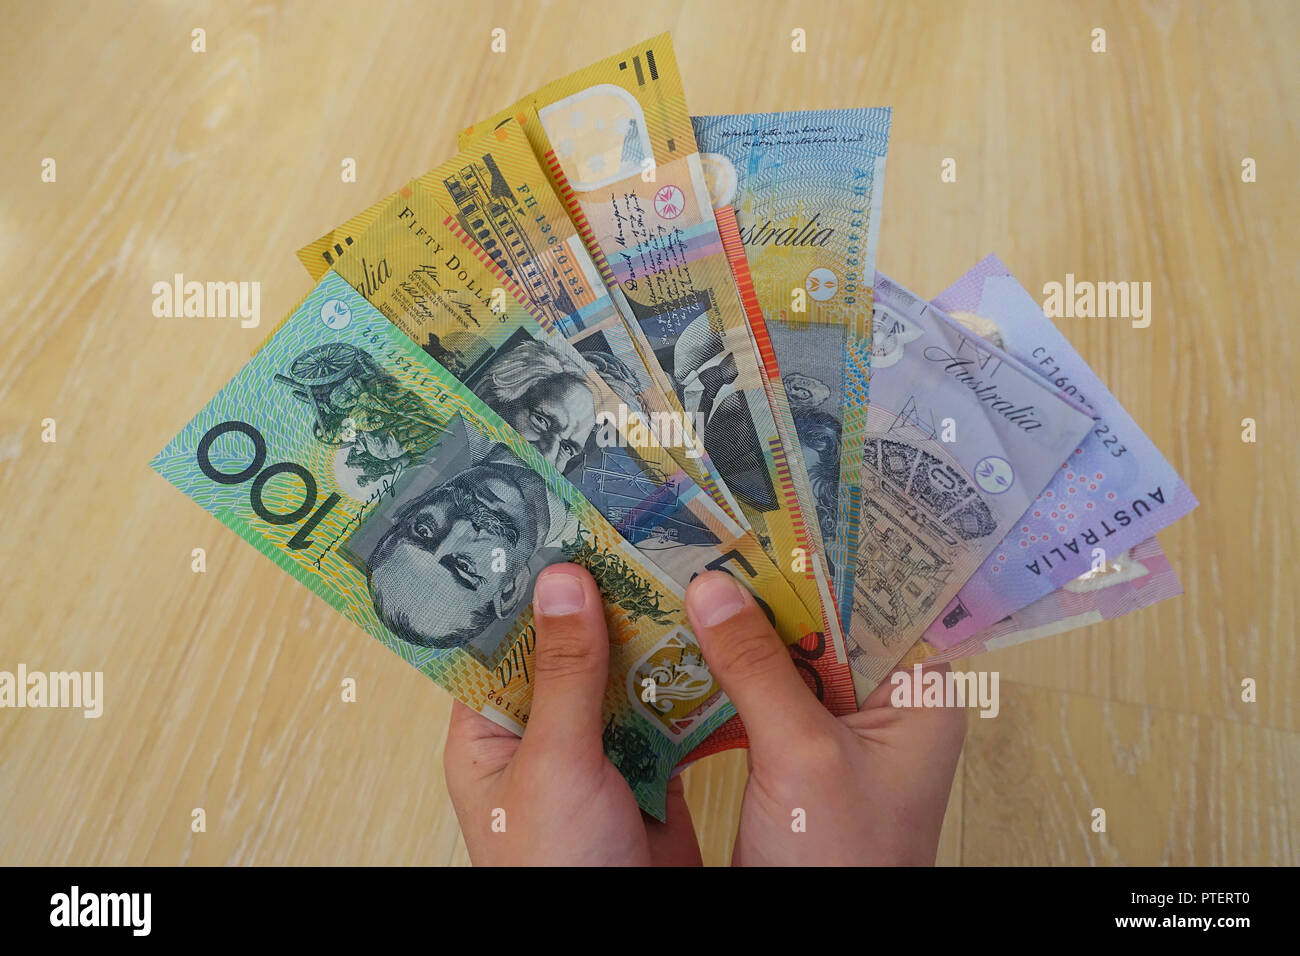 Mixture of Australian currency Stock Photo